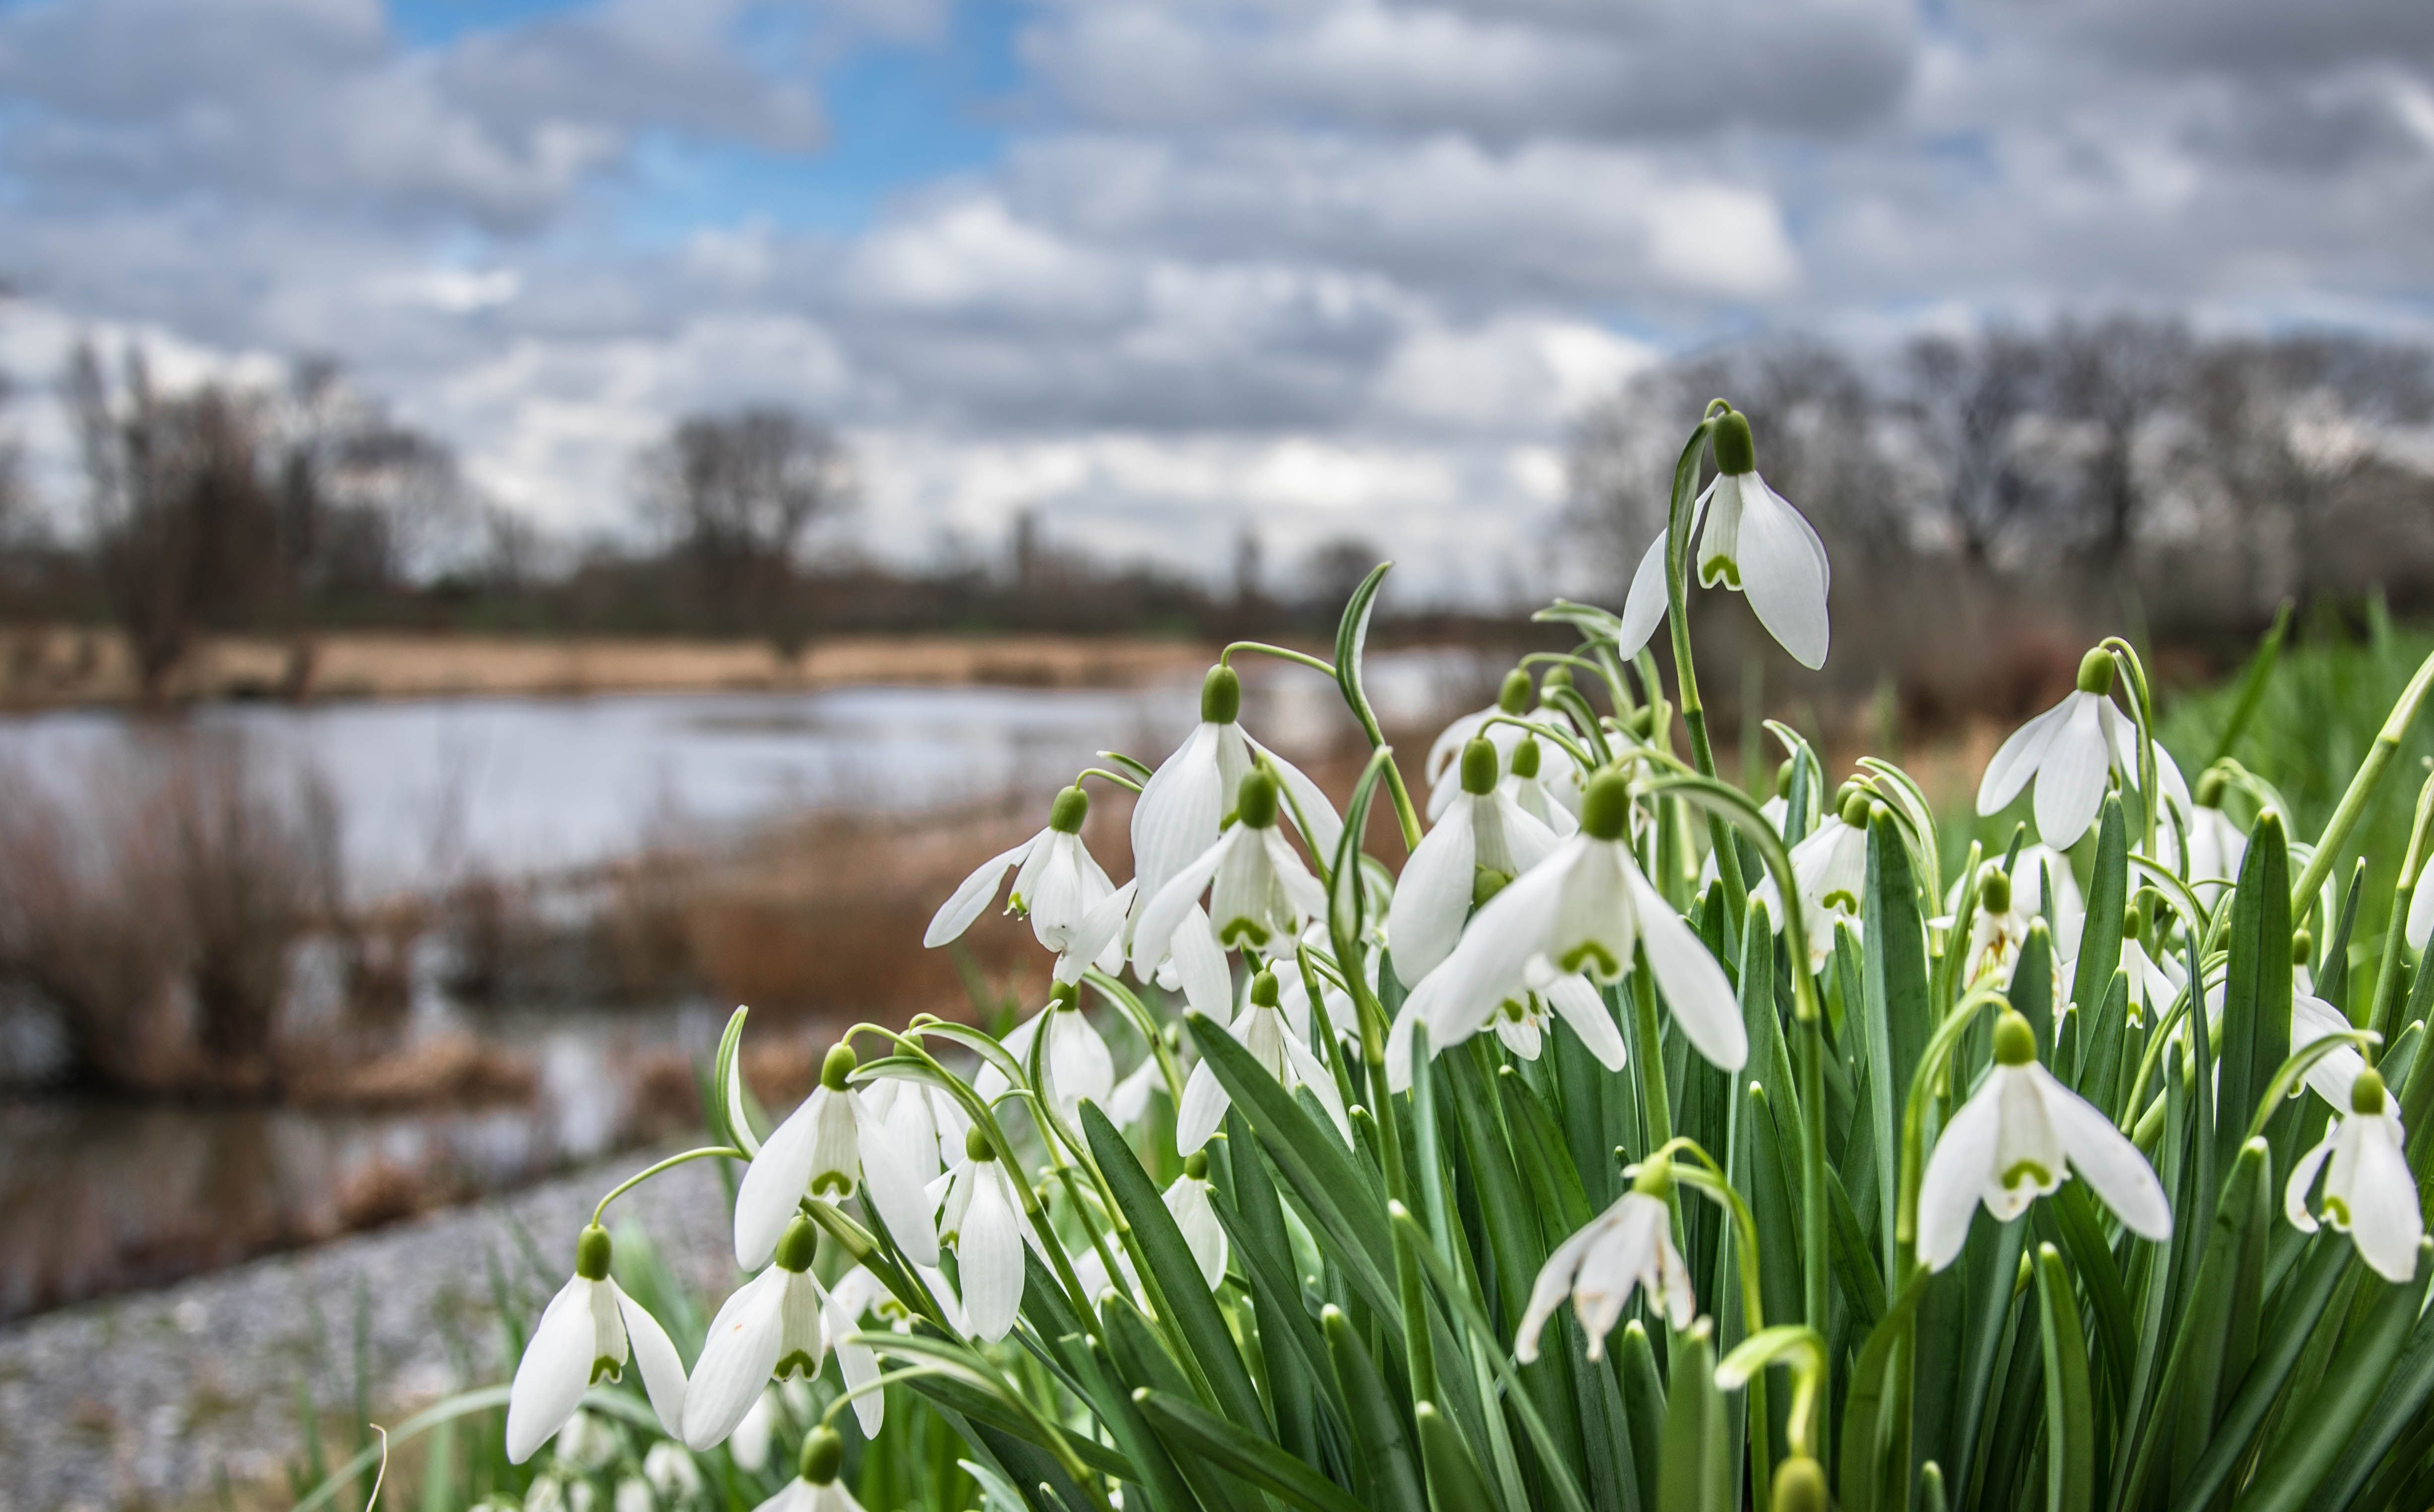 Wallpaper, snowdrops, landscape, nature, spring, season, water, clouds, country, Dutch, holland, flowers 4907x3048